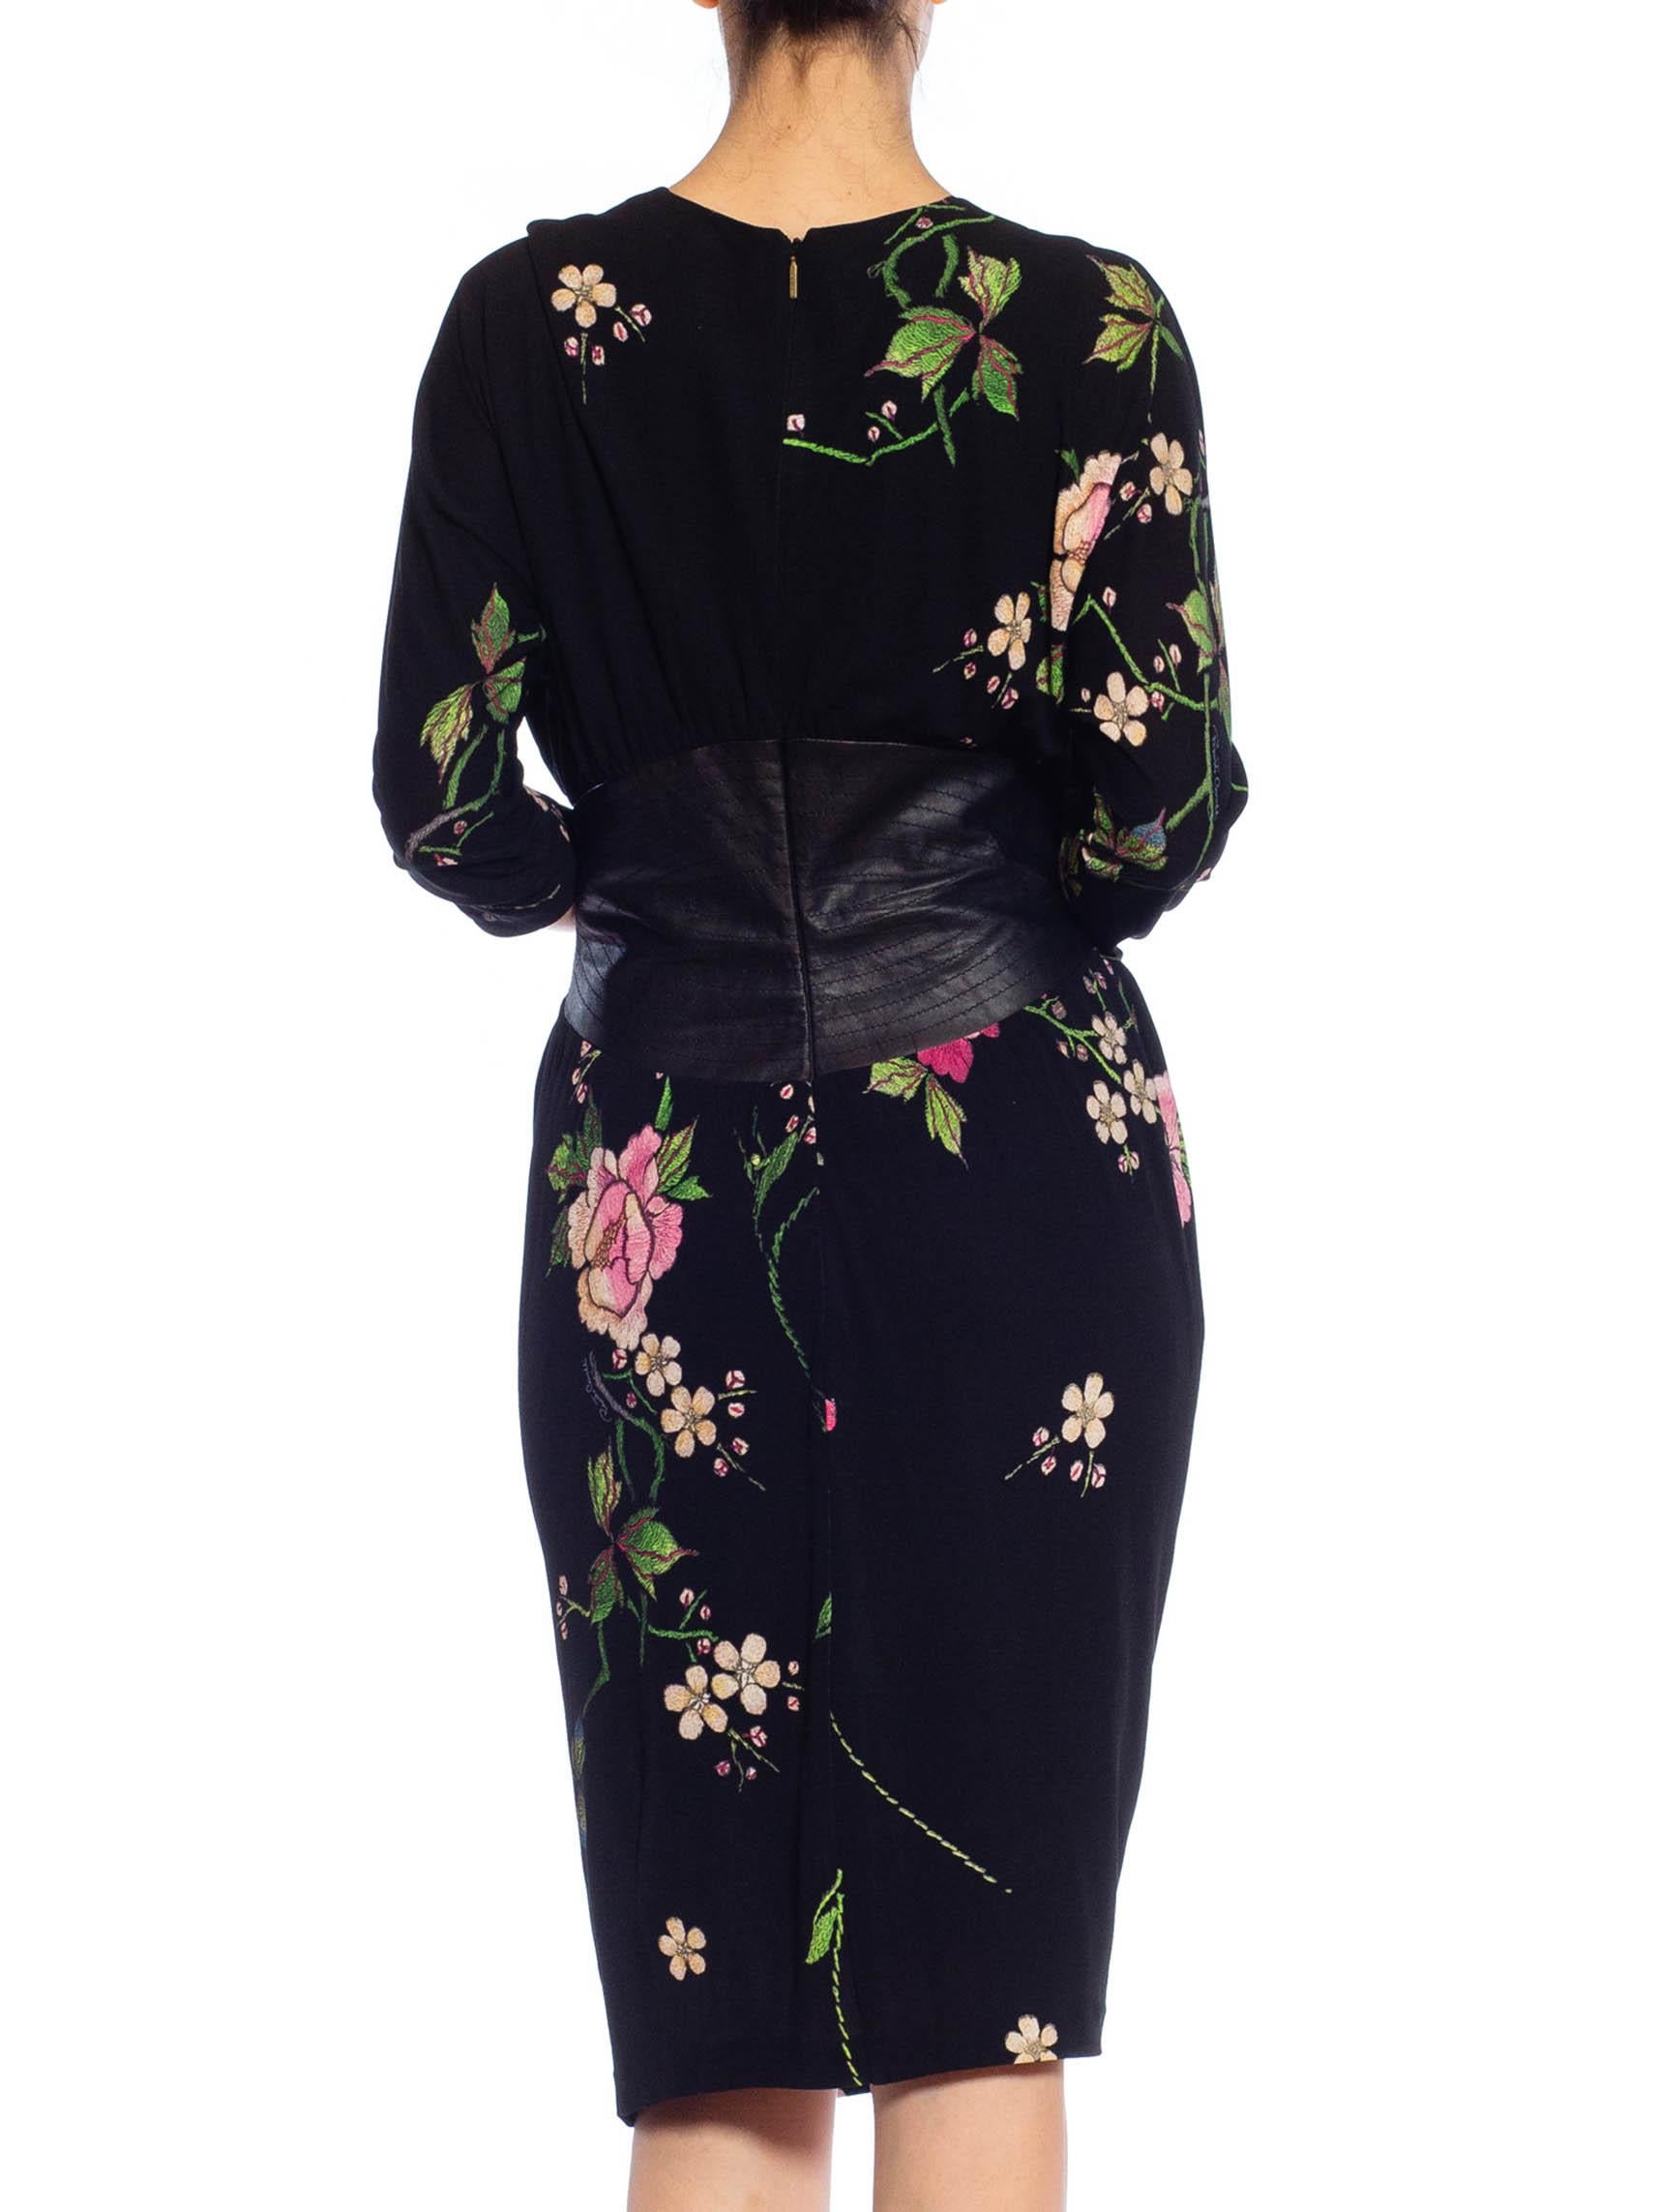 2000S ROBERTO CAVALLI Black Floral Rayon Jersey & Leather Dress For Sale 5